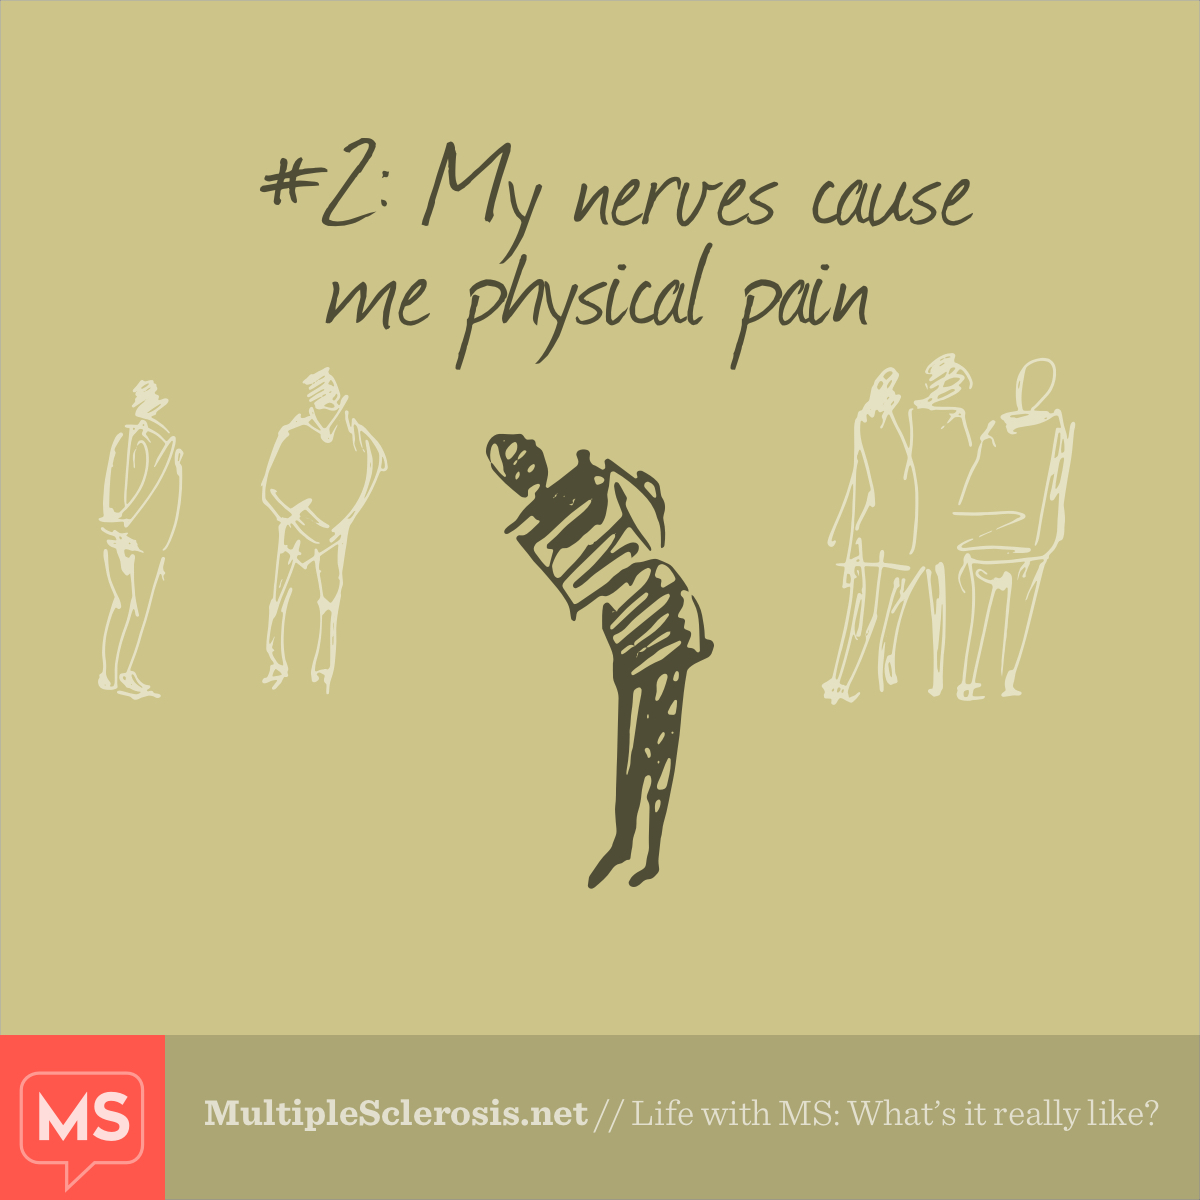 Life with MS: What’s it really like?